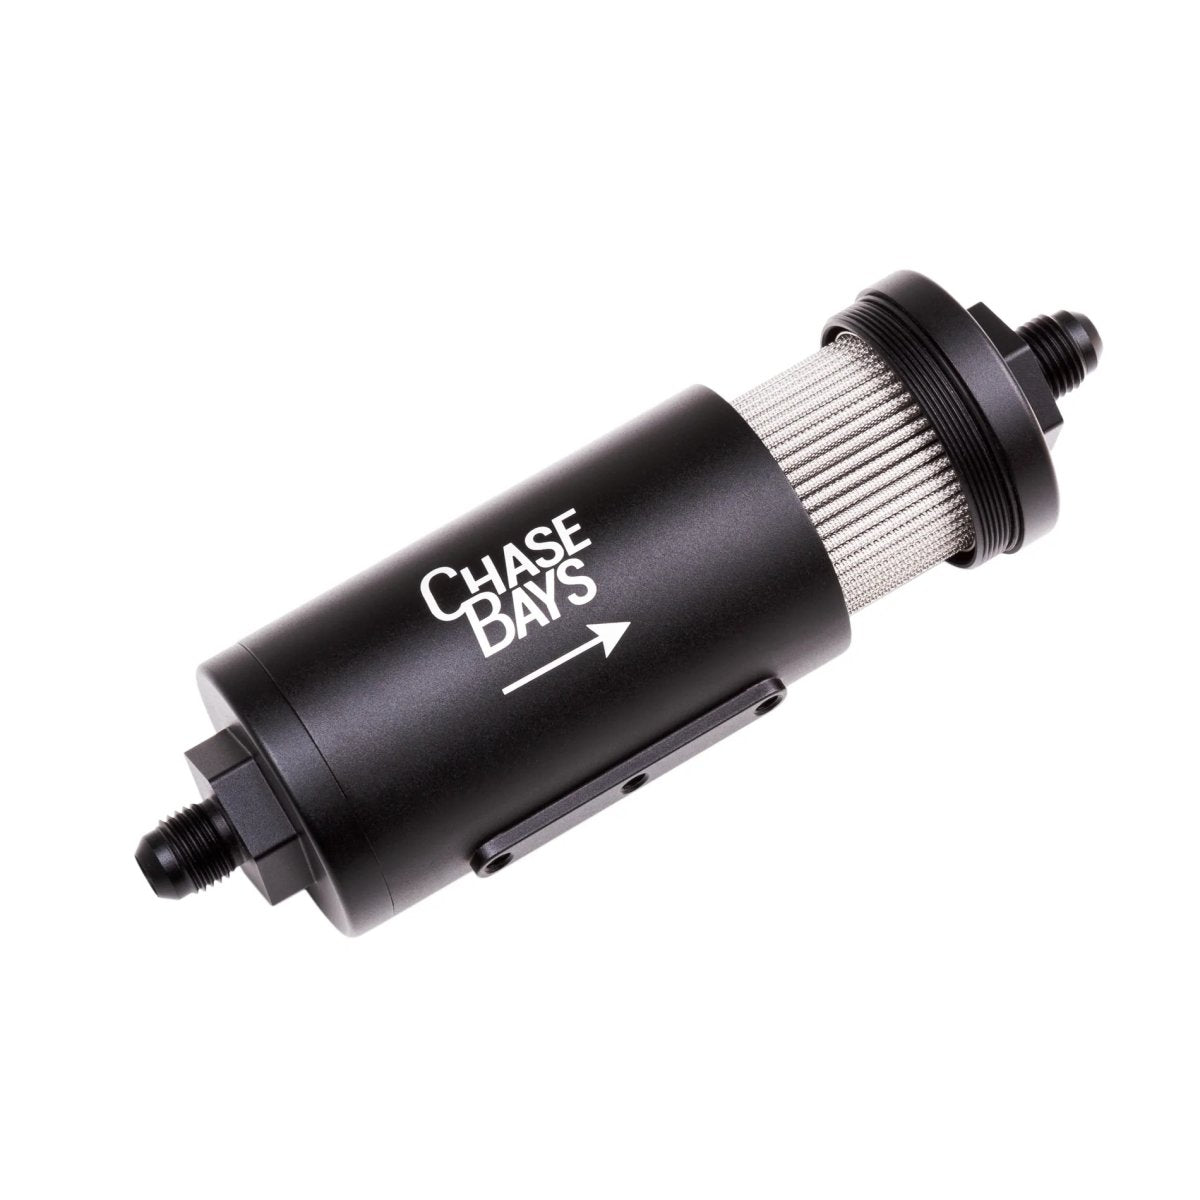 CHASE BAYS High Flow 6AN fuel filter - PARTS33 GmbH